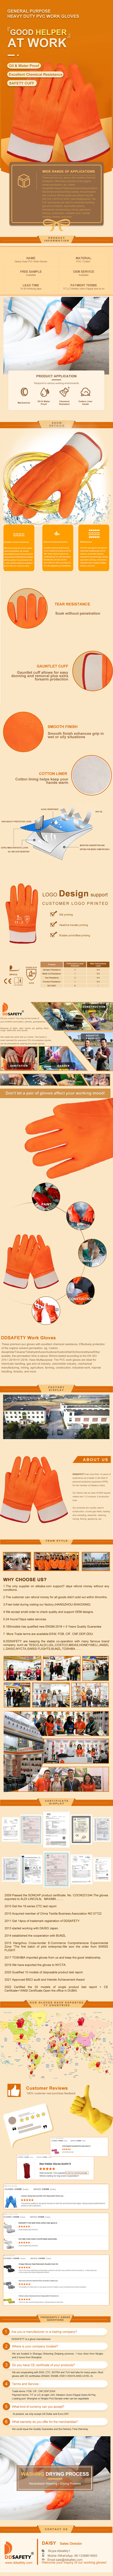 Premium Double-Dipped Hi-Viz Pvc Sandpaper Finish  Gloves With Safety Cuff - DPV312 Premium Double-Dipped Hi-Viz Pvc Sandpaper Finish  Gloves With Safety Cuff - DPV312 gloves,pvc gloves,Hi-Viz PVC gloves,Double-Dipped gloves